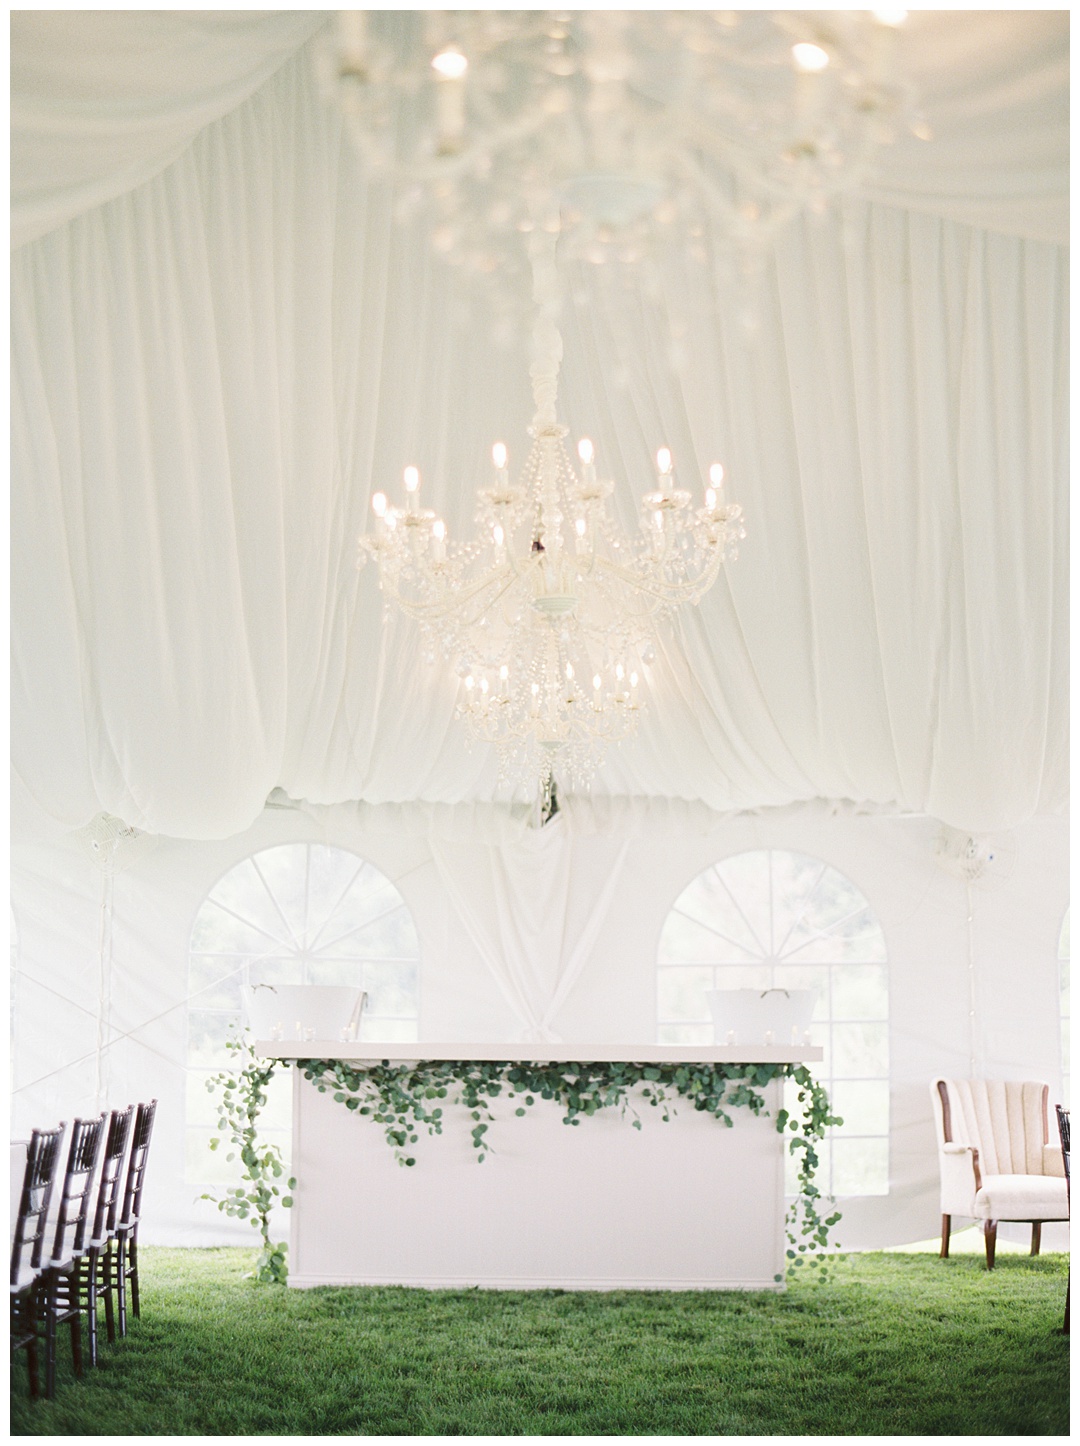 Tent Reception with Chandelier Lush Backyard Wedding on Film Featured on Magnolia Rouge with Sarah Sunstrom Photography